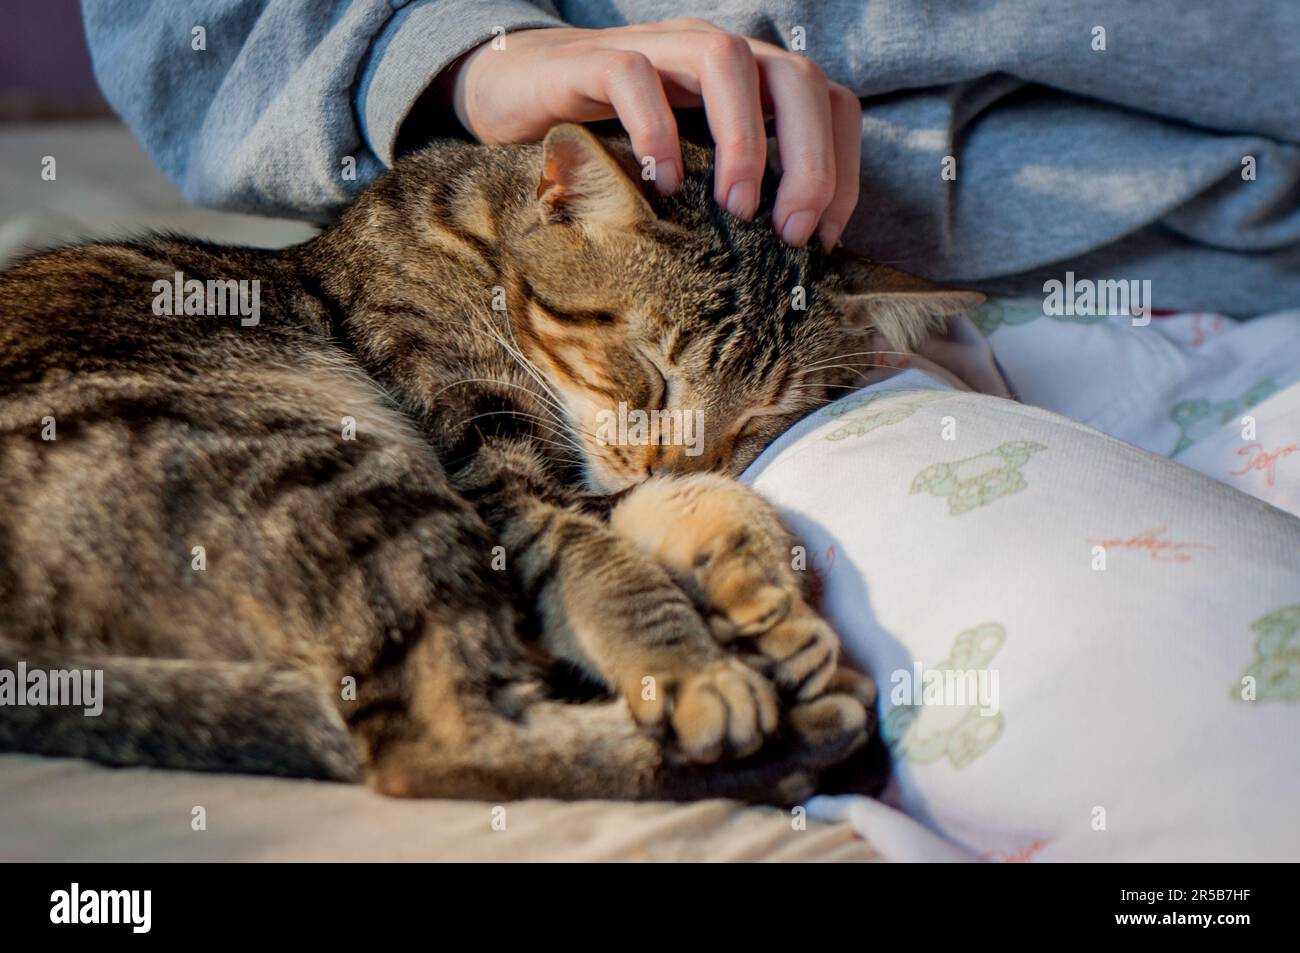 Tabby cat lying on lap receiving affection Stock Photo